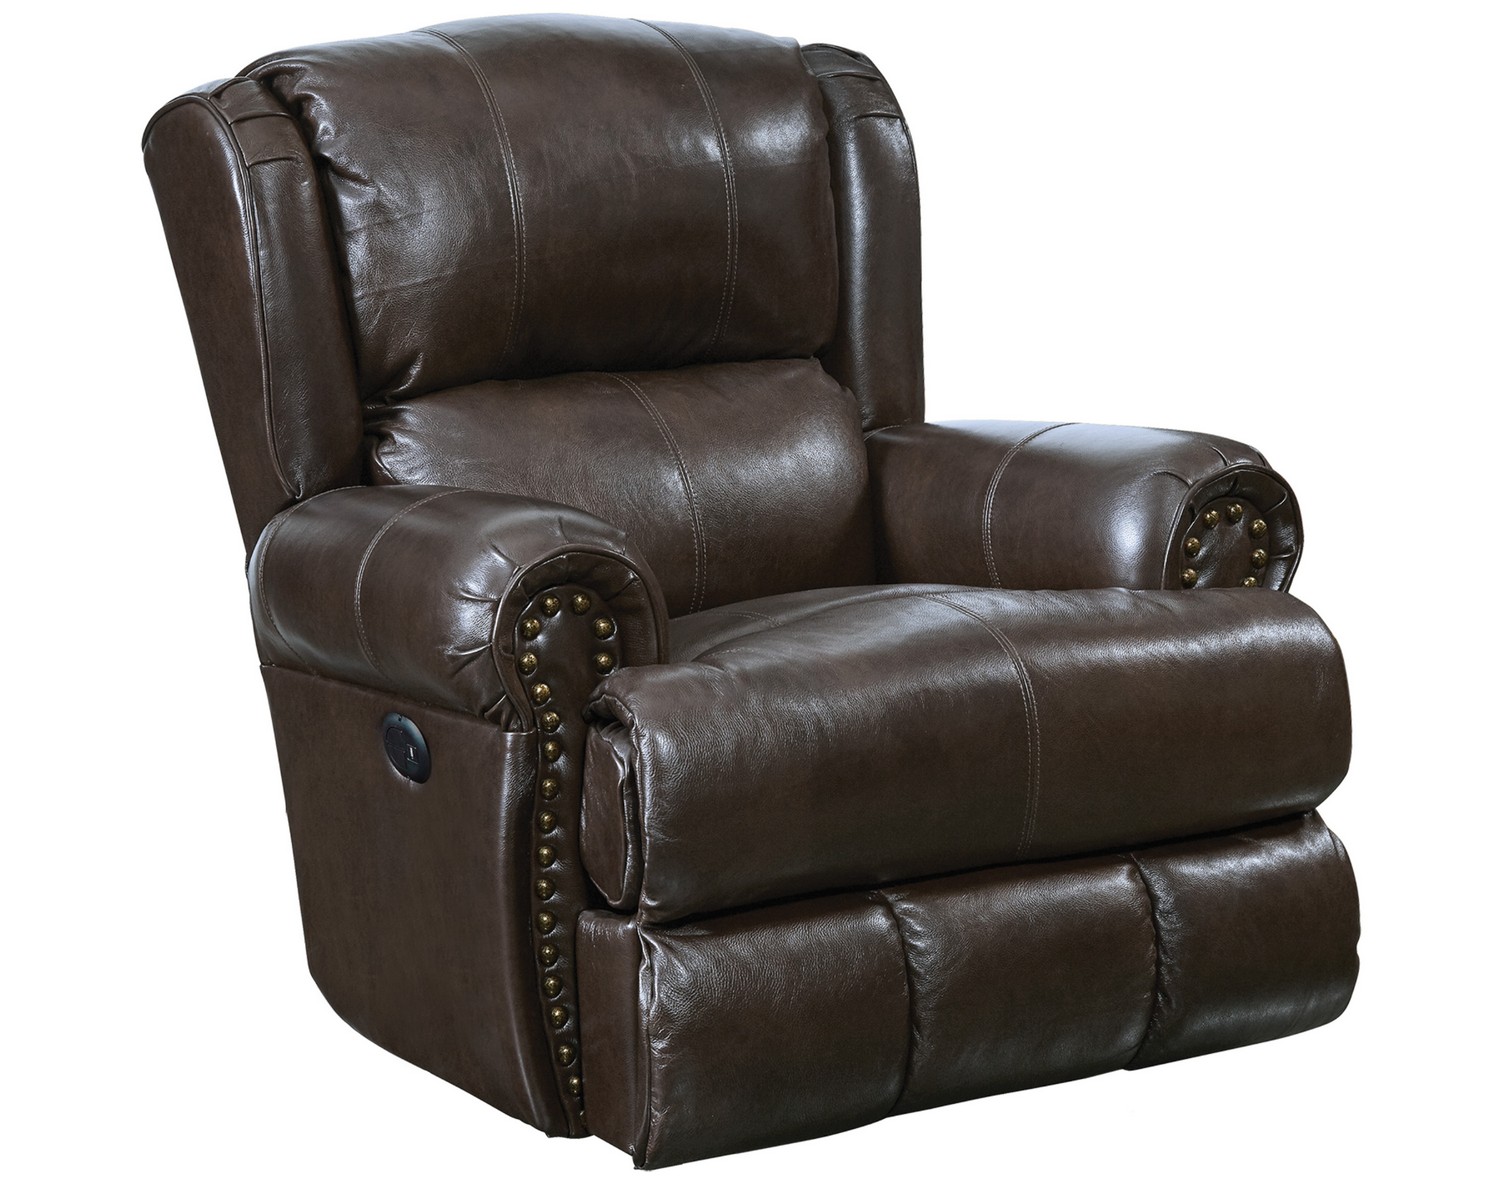 CatNapper Duncan Top Grain Leather Touch Deluxe Glider Recliner - Chocolate